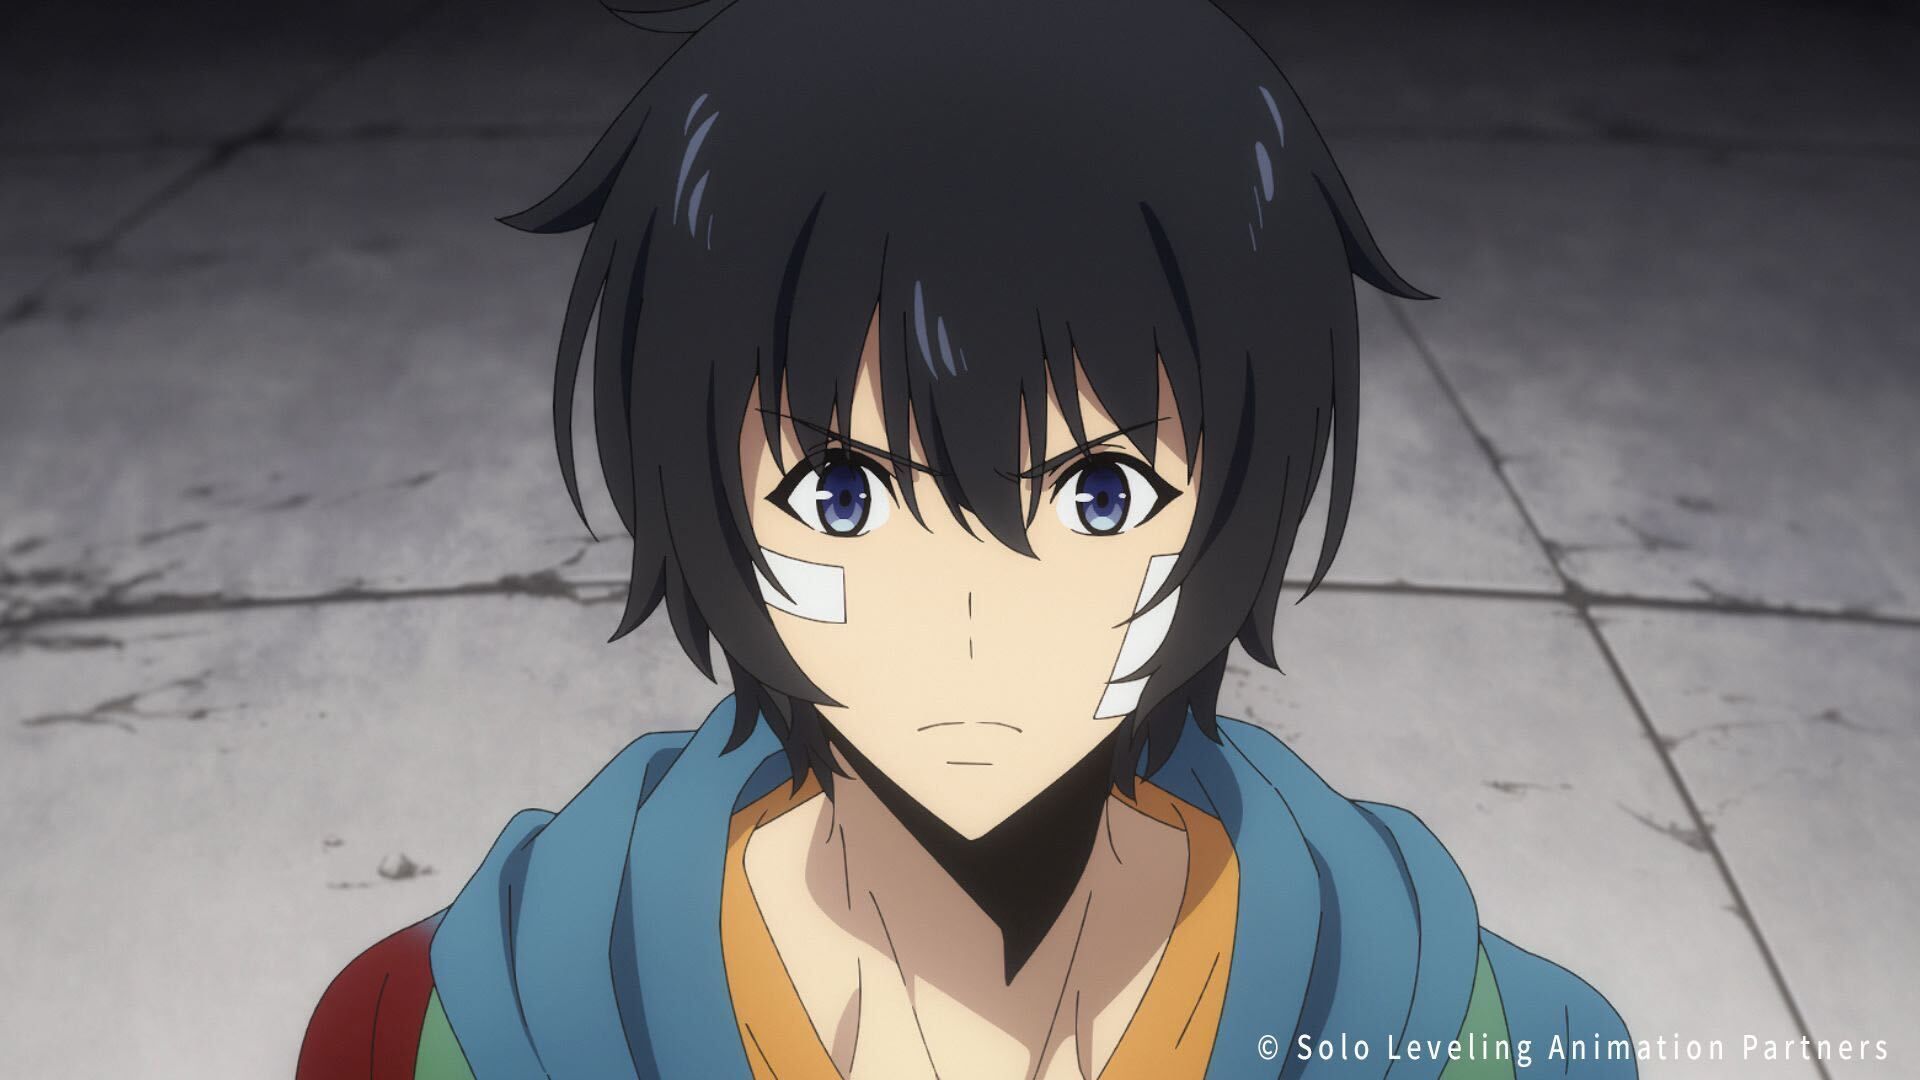 Sung Jin-@oo as seen in Solo Leveling anime (Image via A-1 Pictures)